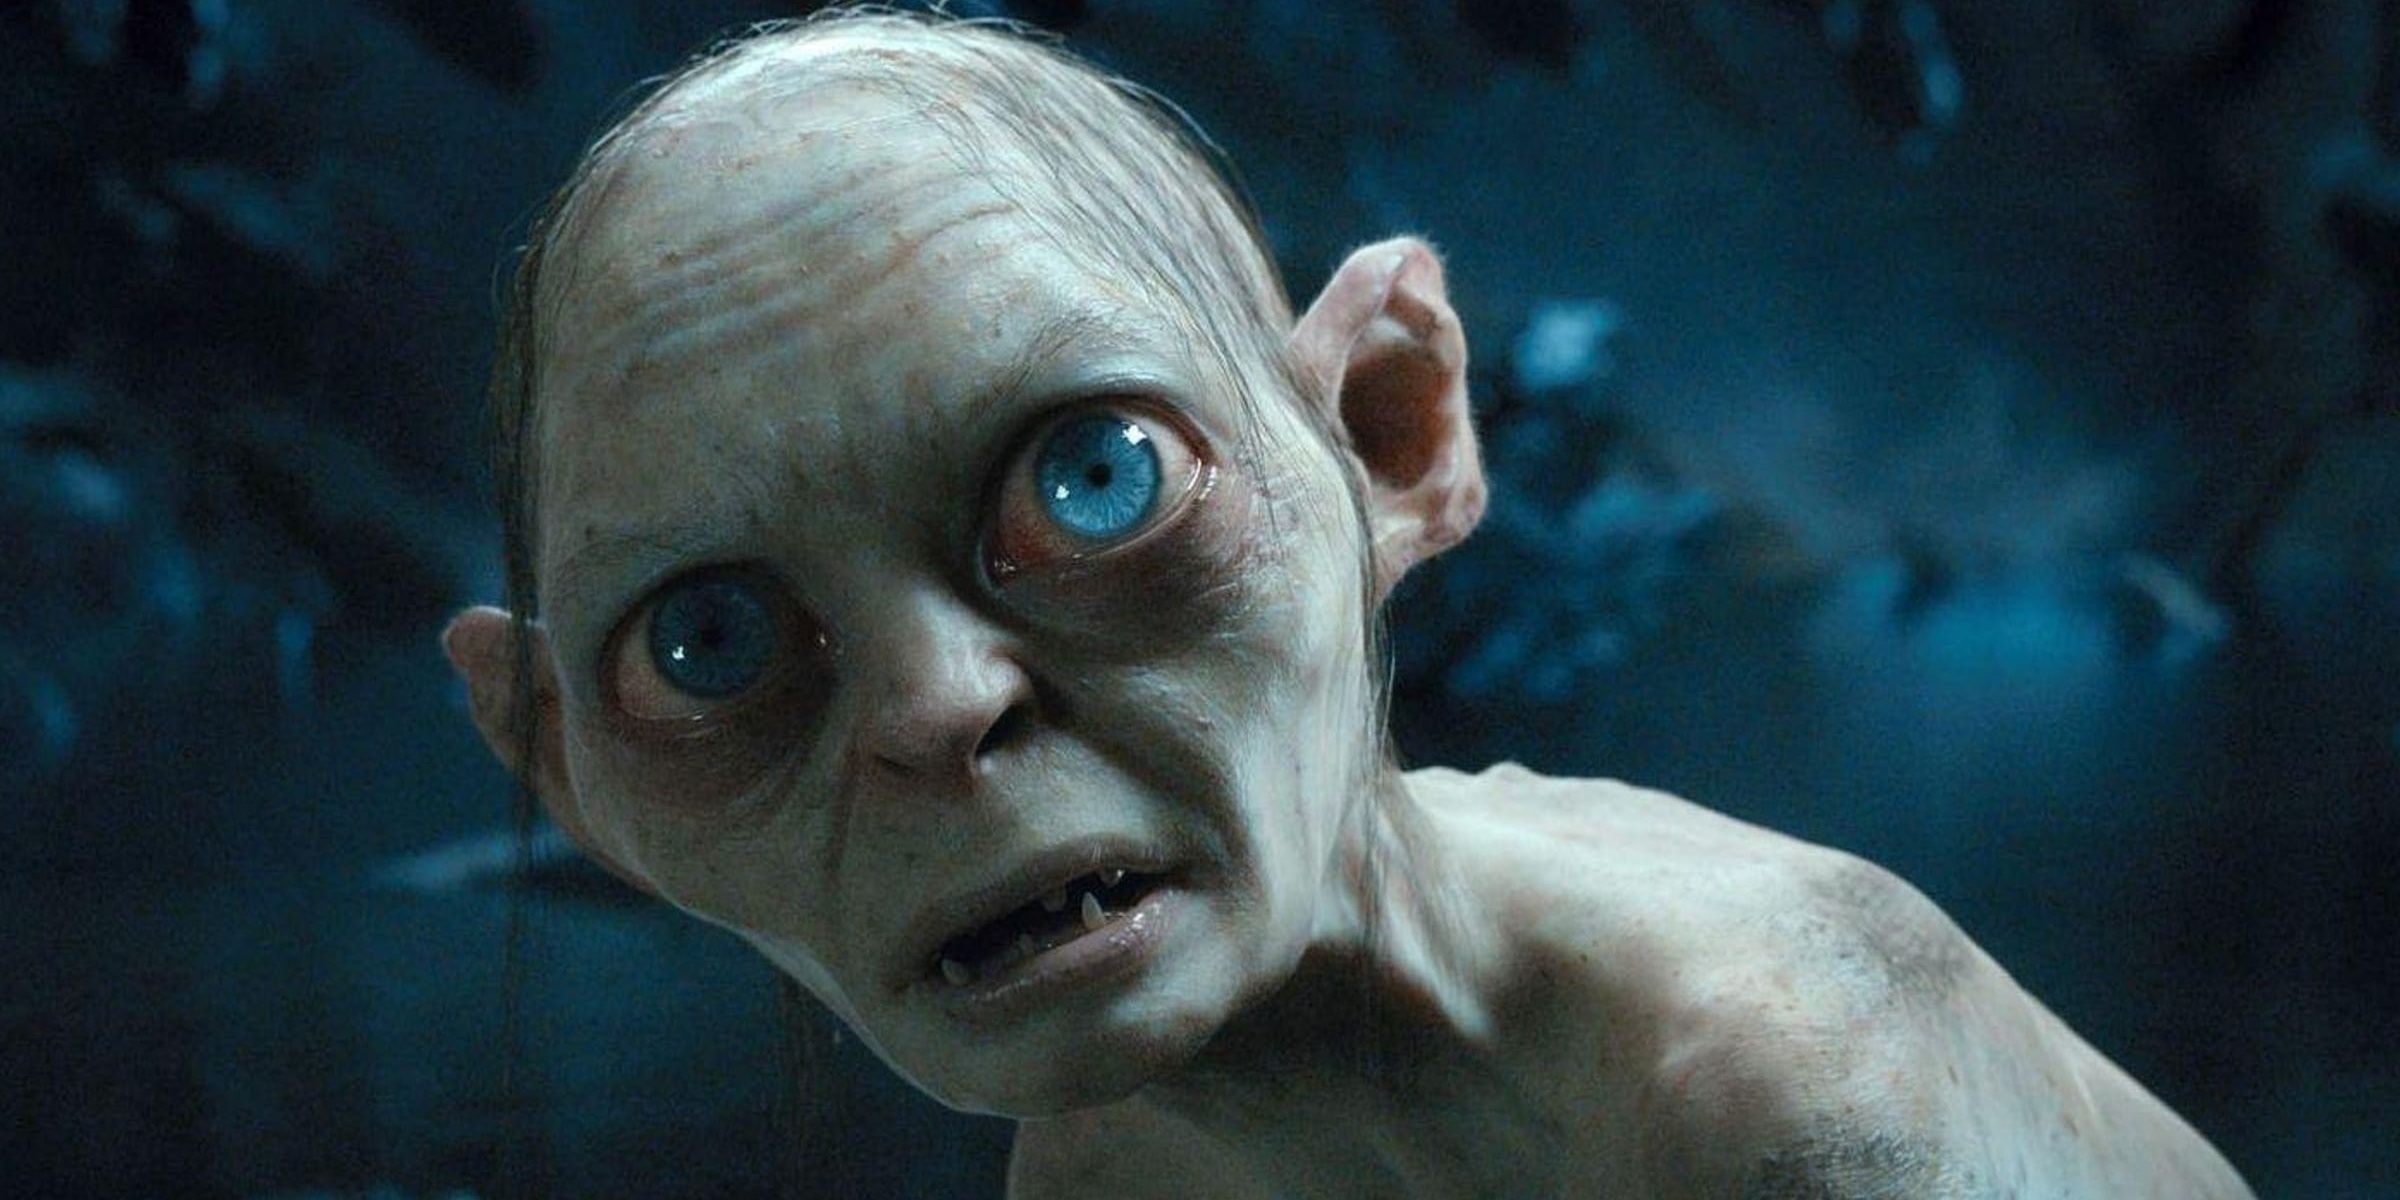 Gollum in The Hobbit: An Unexpected Journey Lord of the Rings